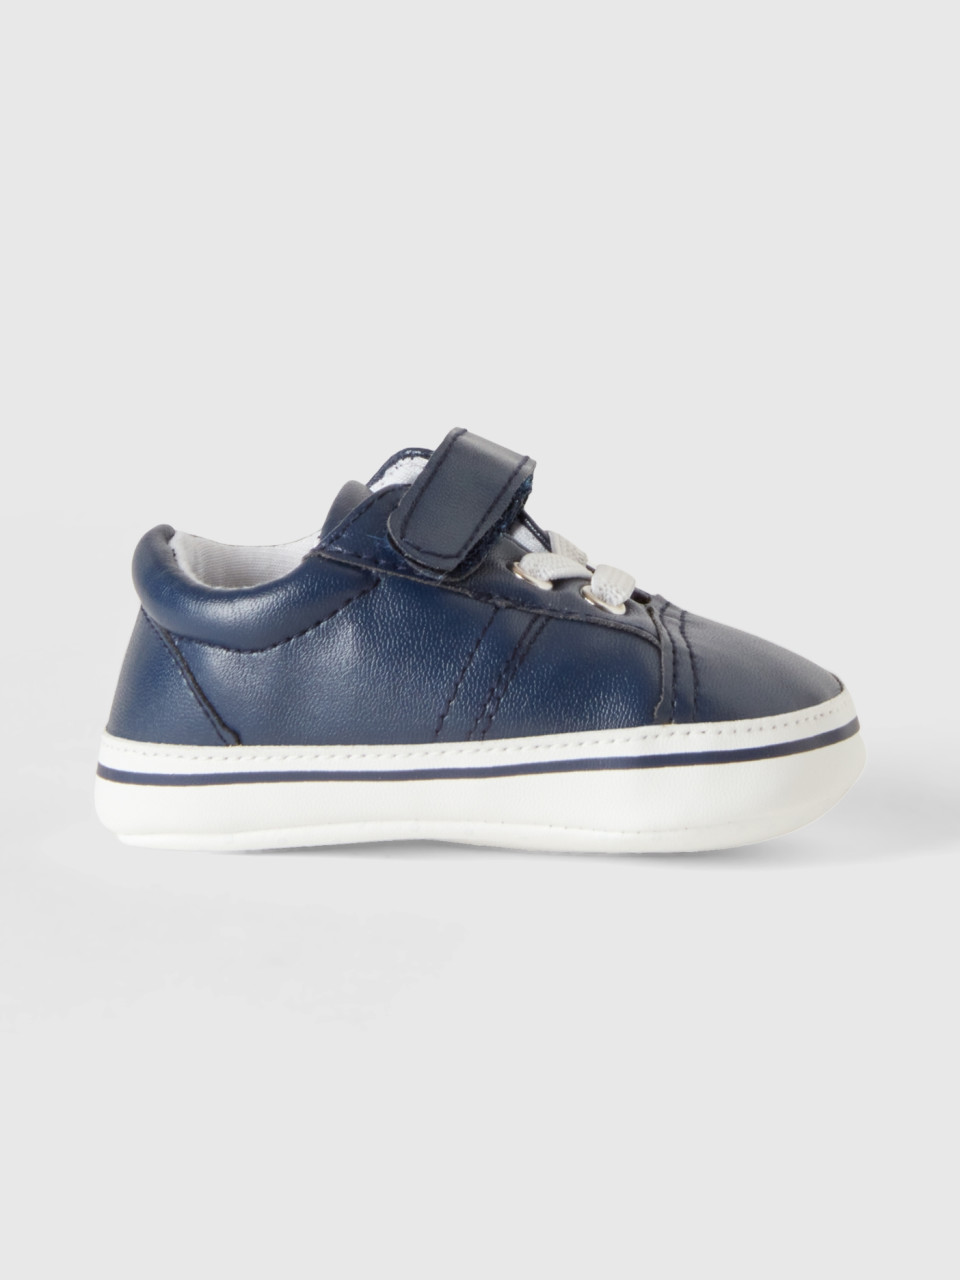 Benetton, First Step Shoes With Laces, Dark Blue, Kids